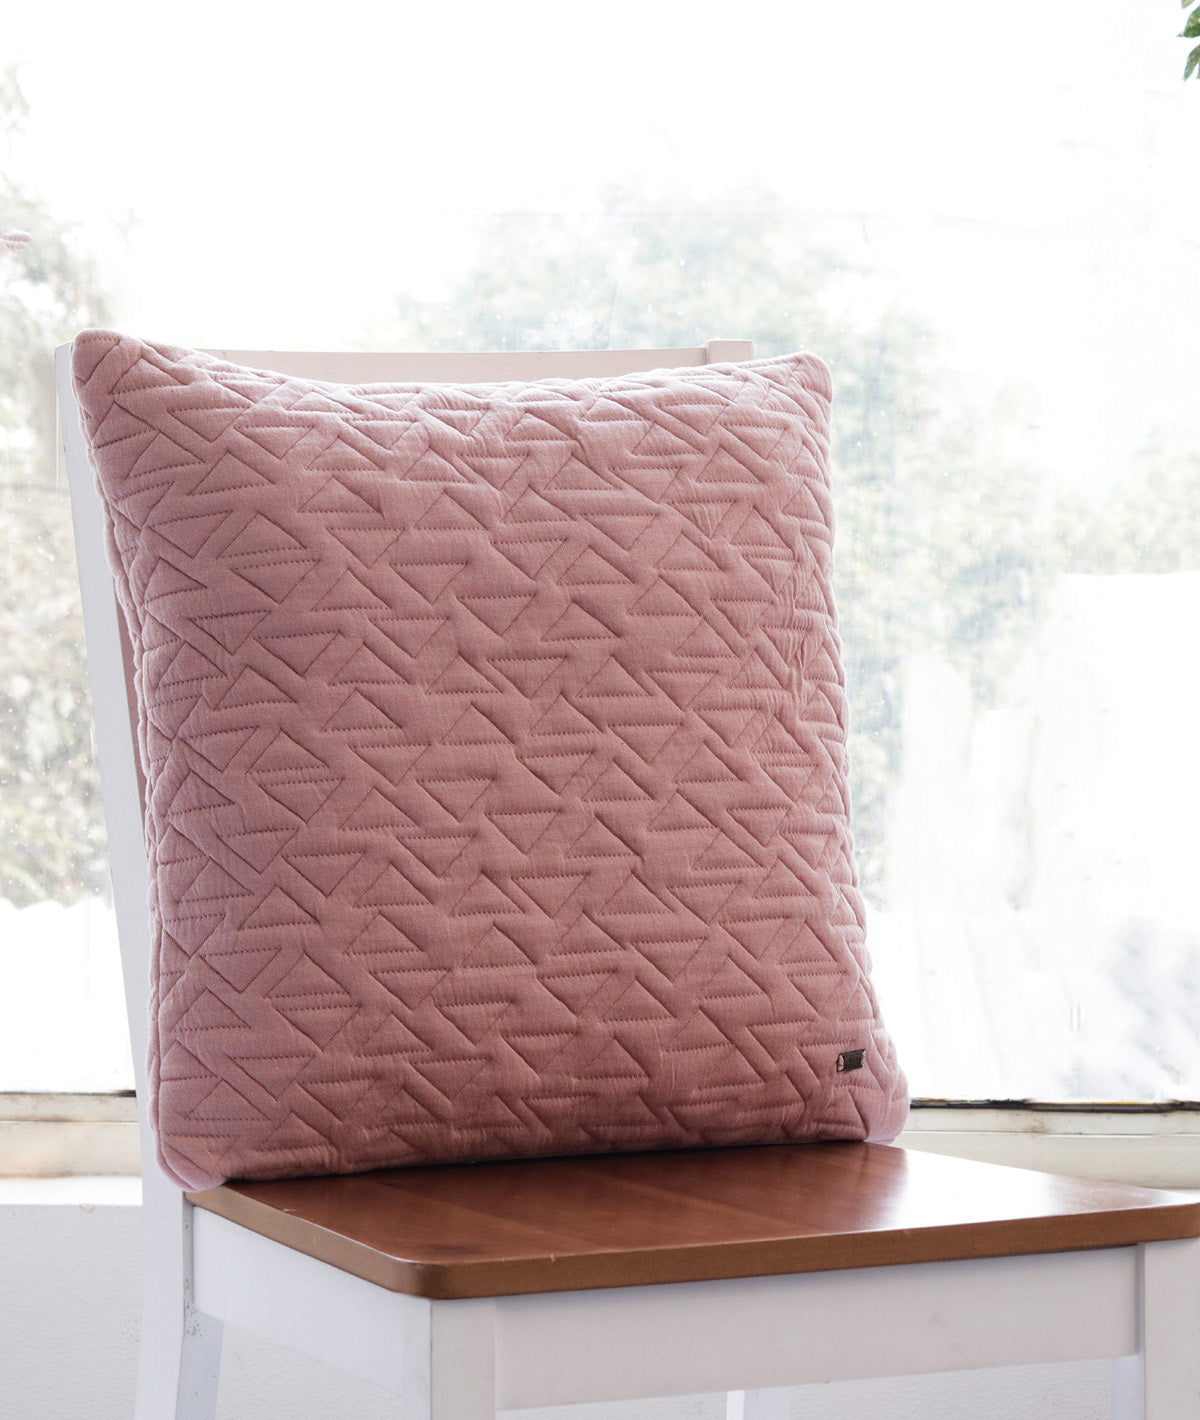 Totit Cotton Knitted Decorative Cameo Pink Color 18 x 18 Inches Cushion Cover